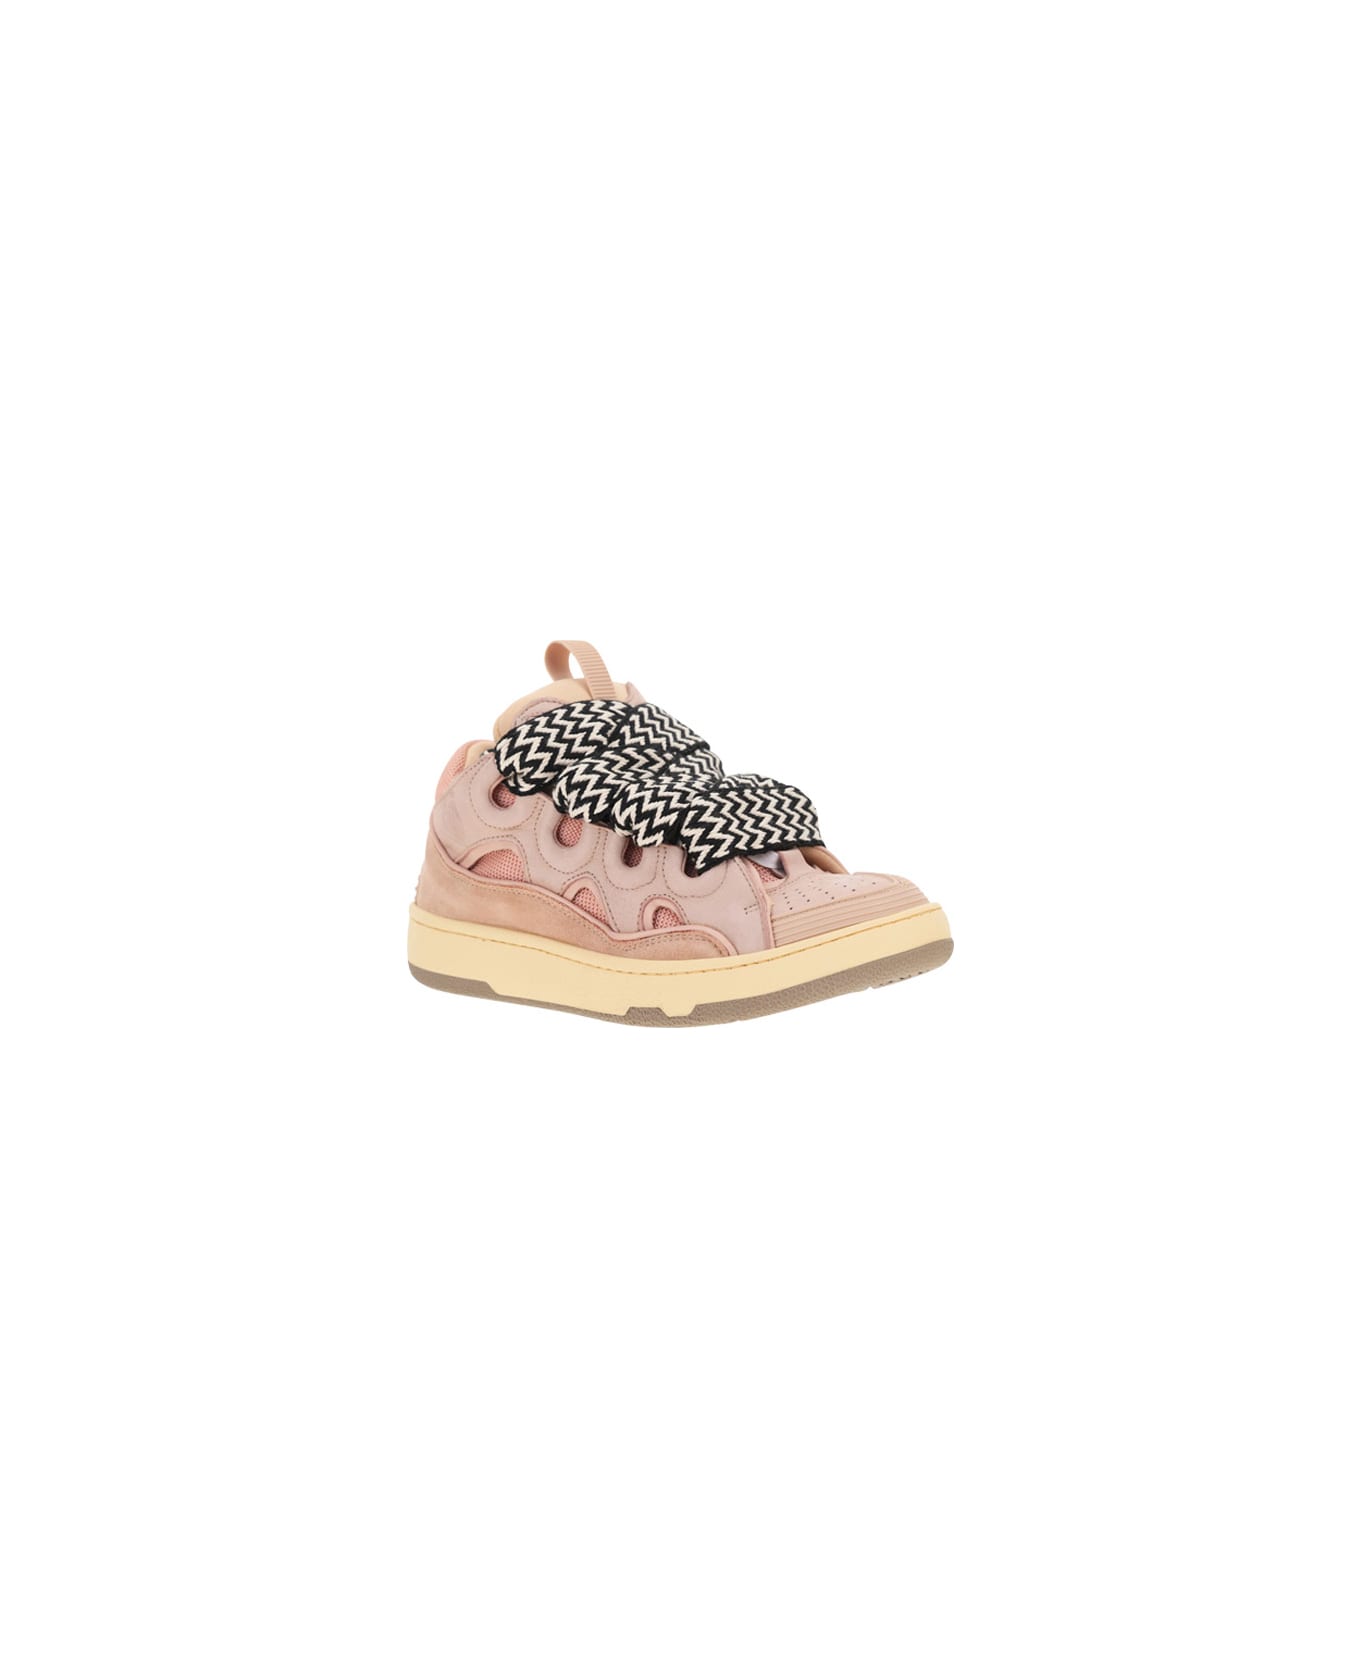 Lanvin Curb Sneakers In Pink Leather - Pale Pink スニーカー